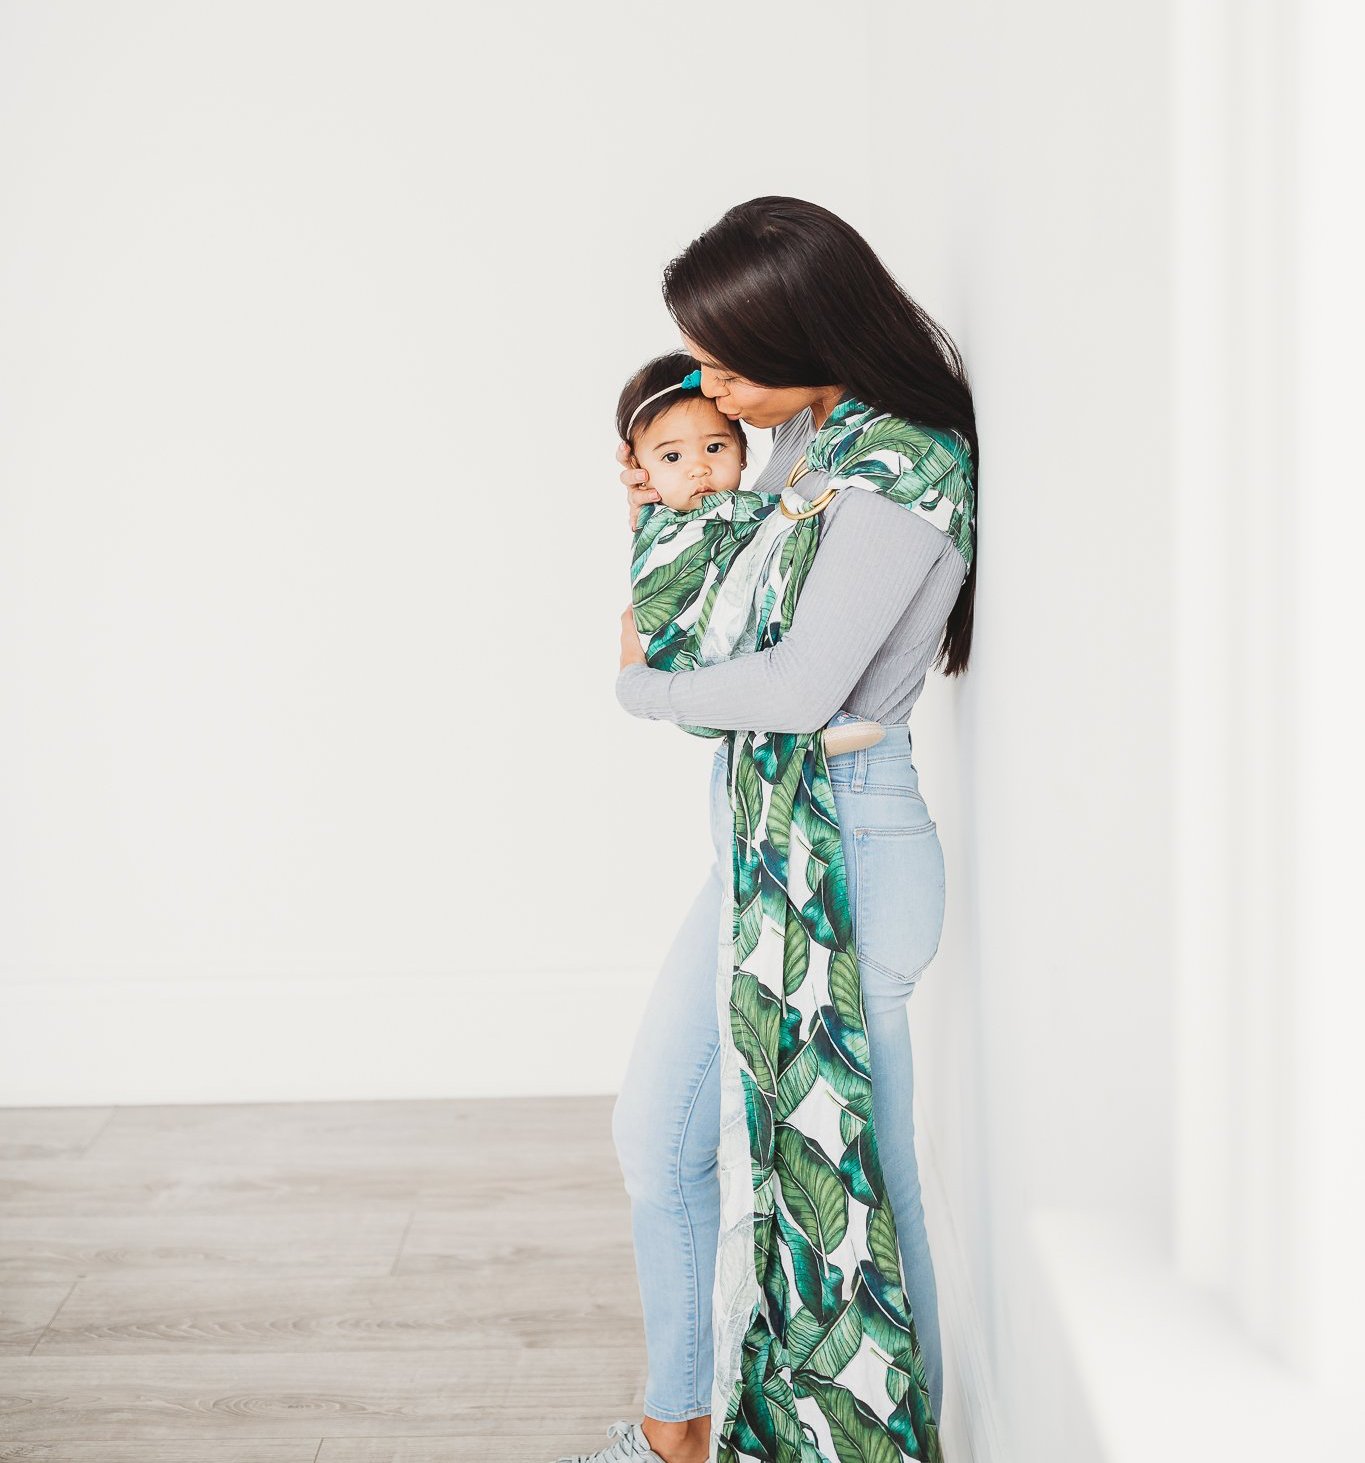 Banana leaf tropically printed linen ring slings.  Babycarriers handmade in Toronto, Canada for stylish babywearing moms. 